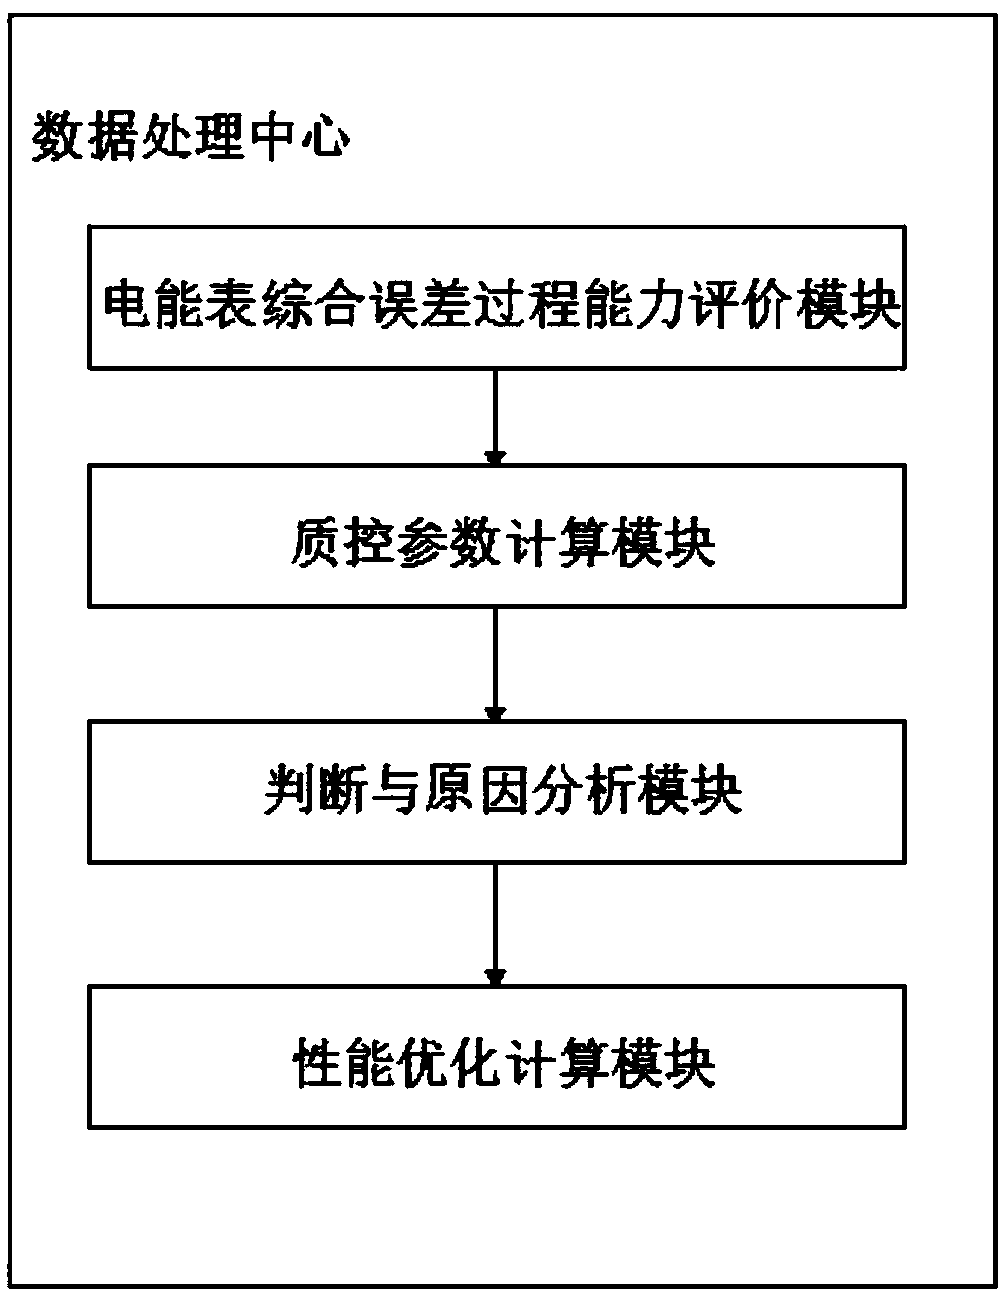 SPC (statistical process control)-based electric energy meter comprehensive error process capability evaluation method and evaluation system